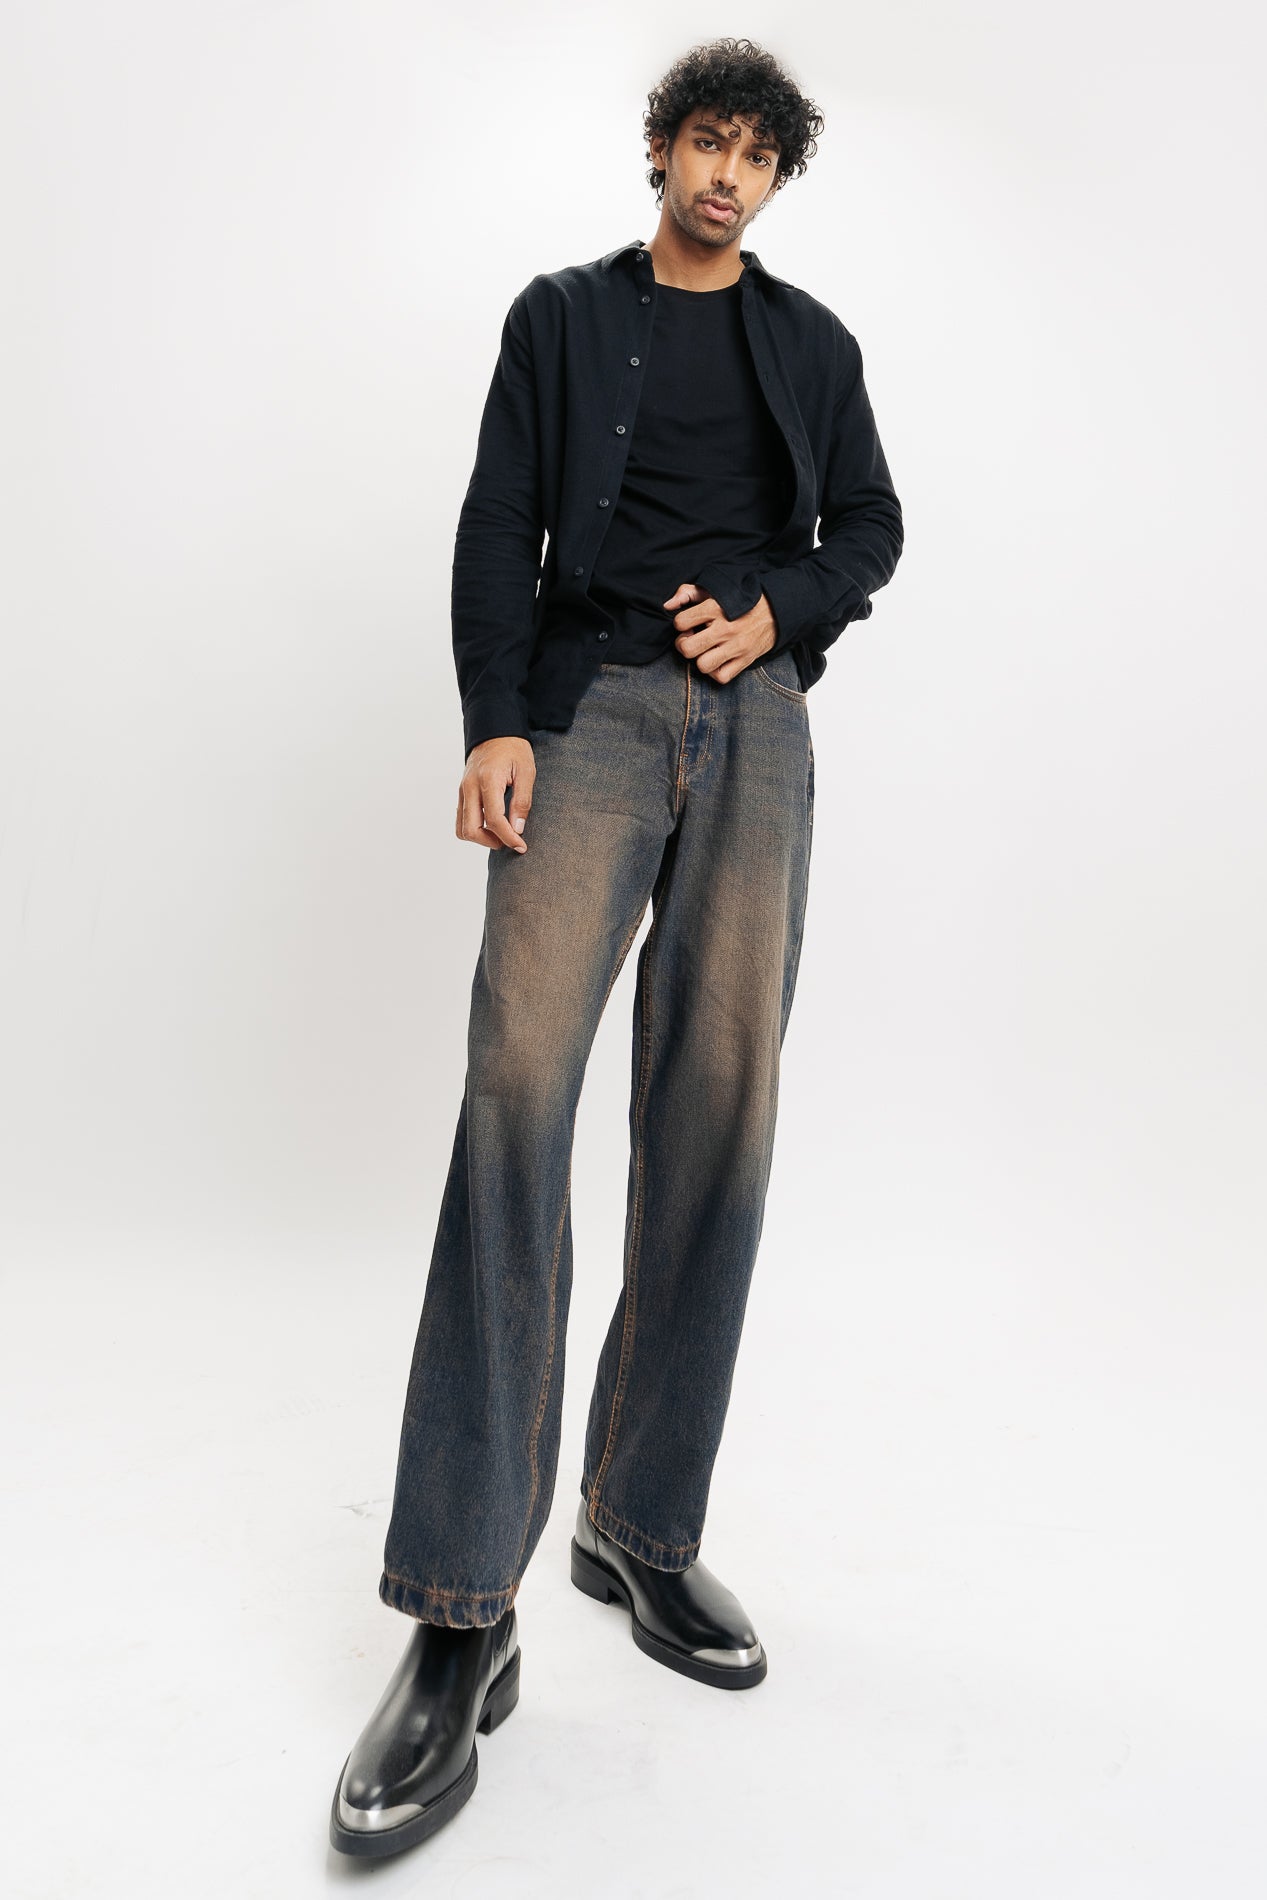 TINTED MEN'S WIDE JEANS